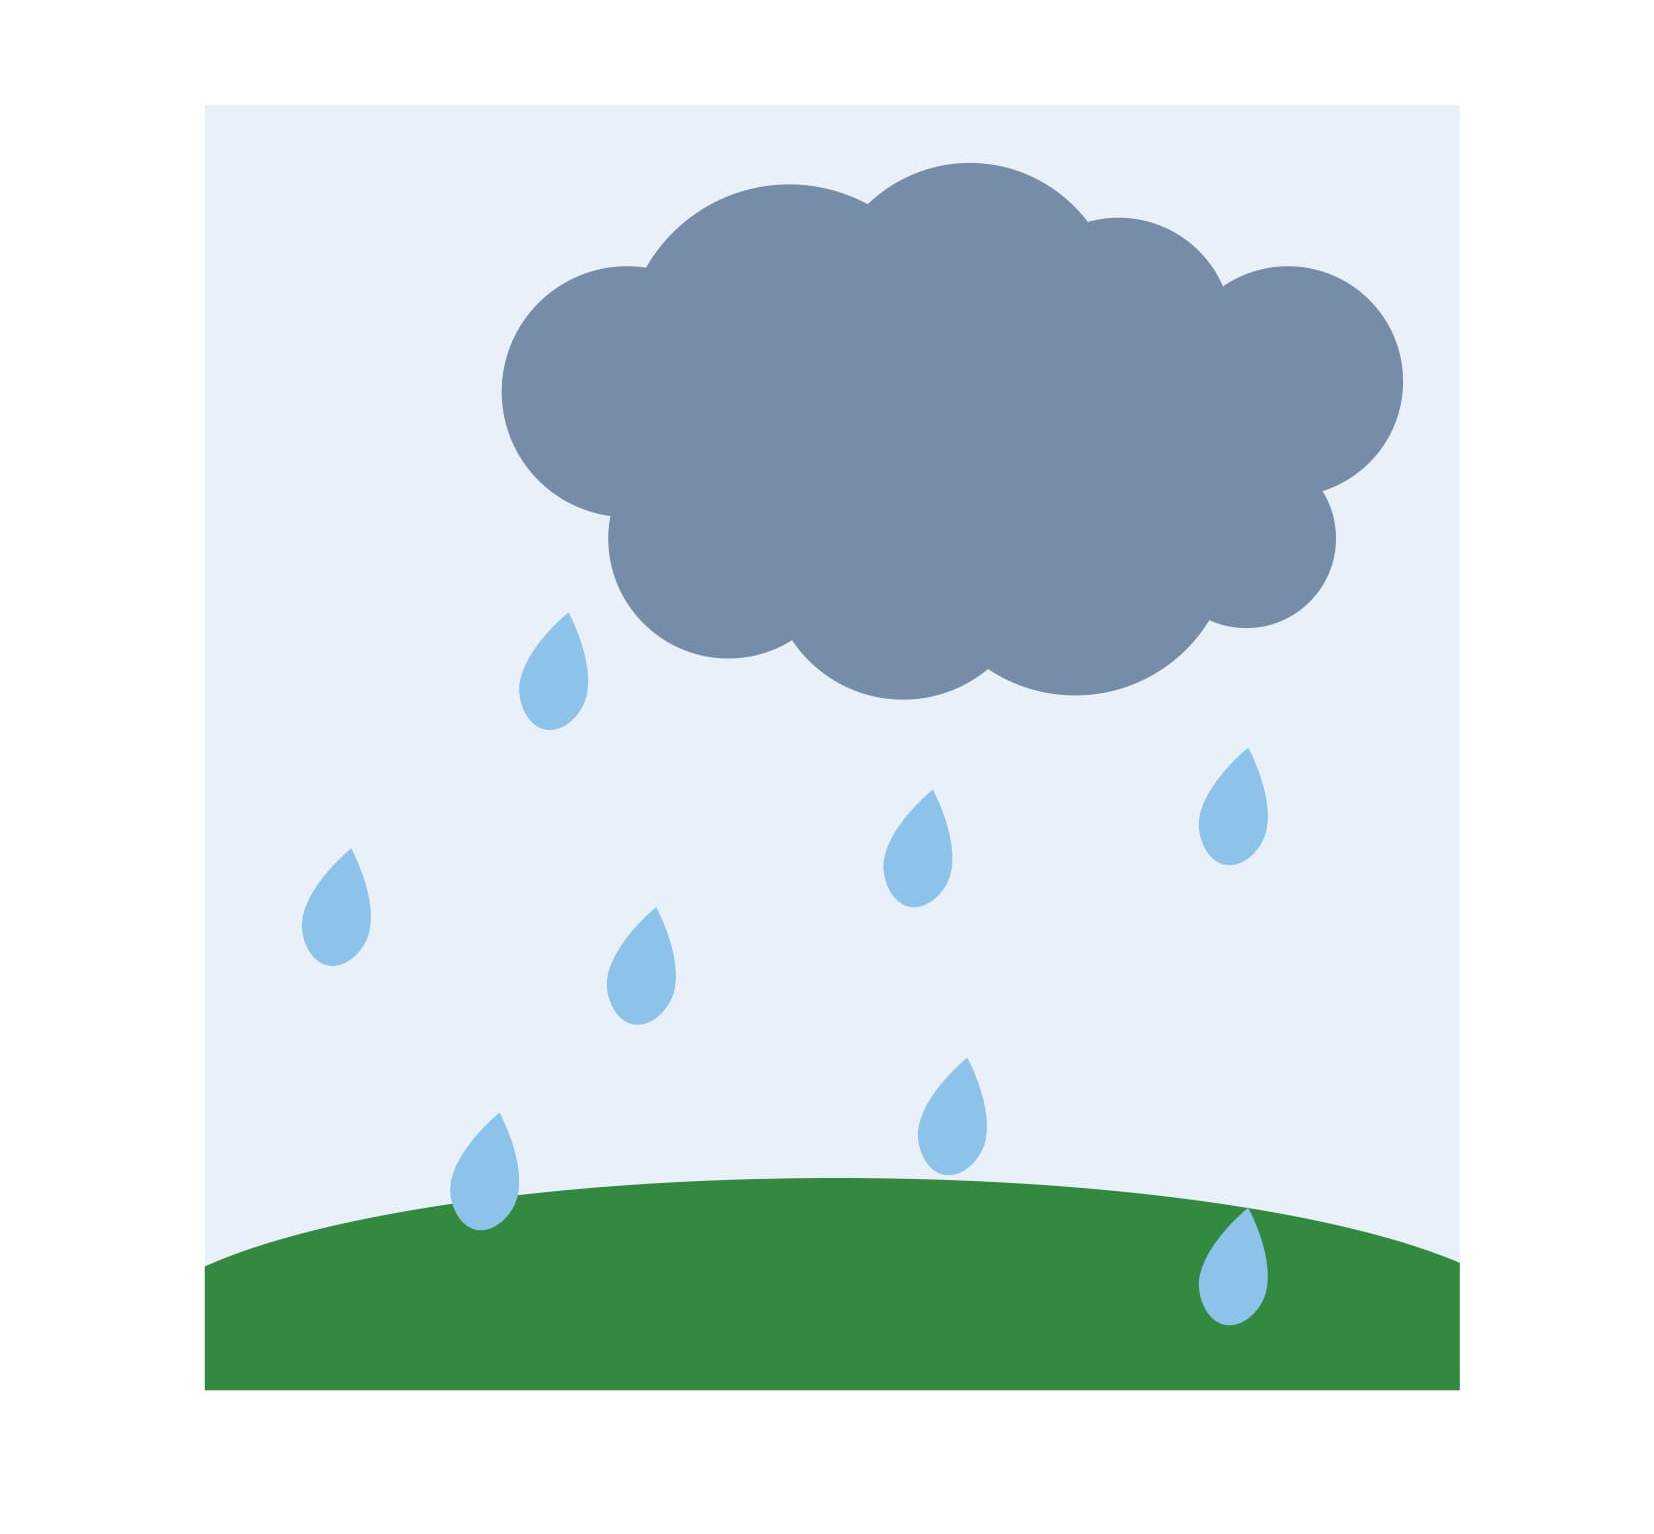 How the weather. Weather super simple. Super simple Learning hows the weather?. Weather Flash Cards. Weather Flashcards for Kids.